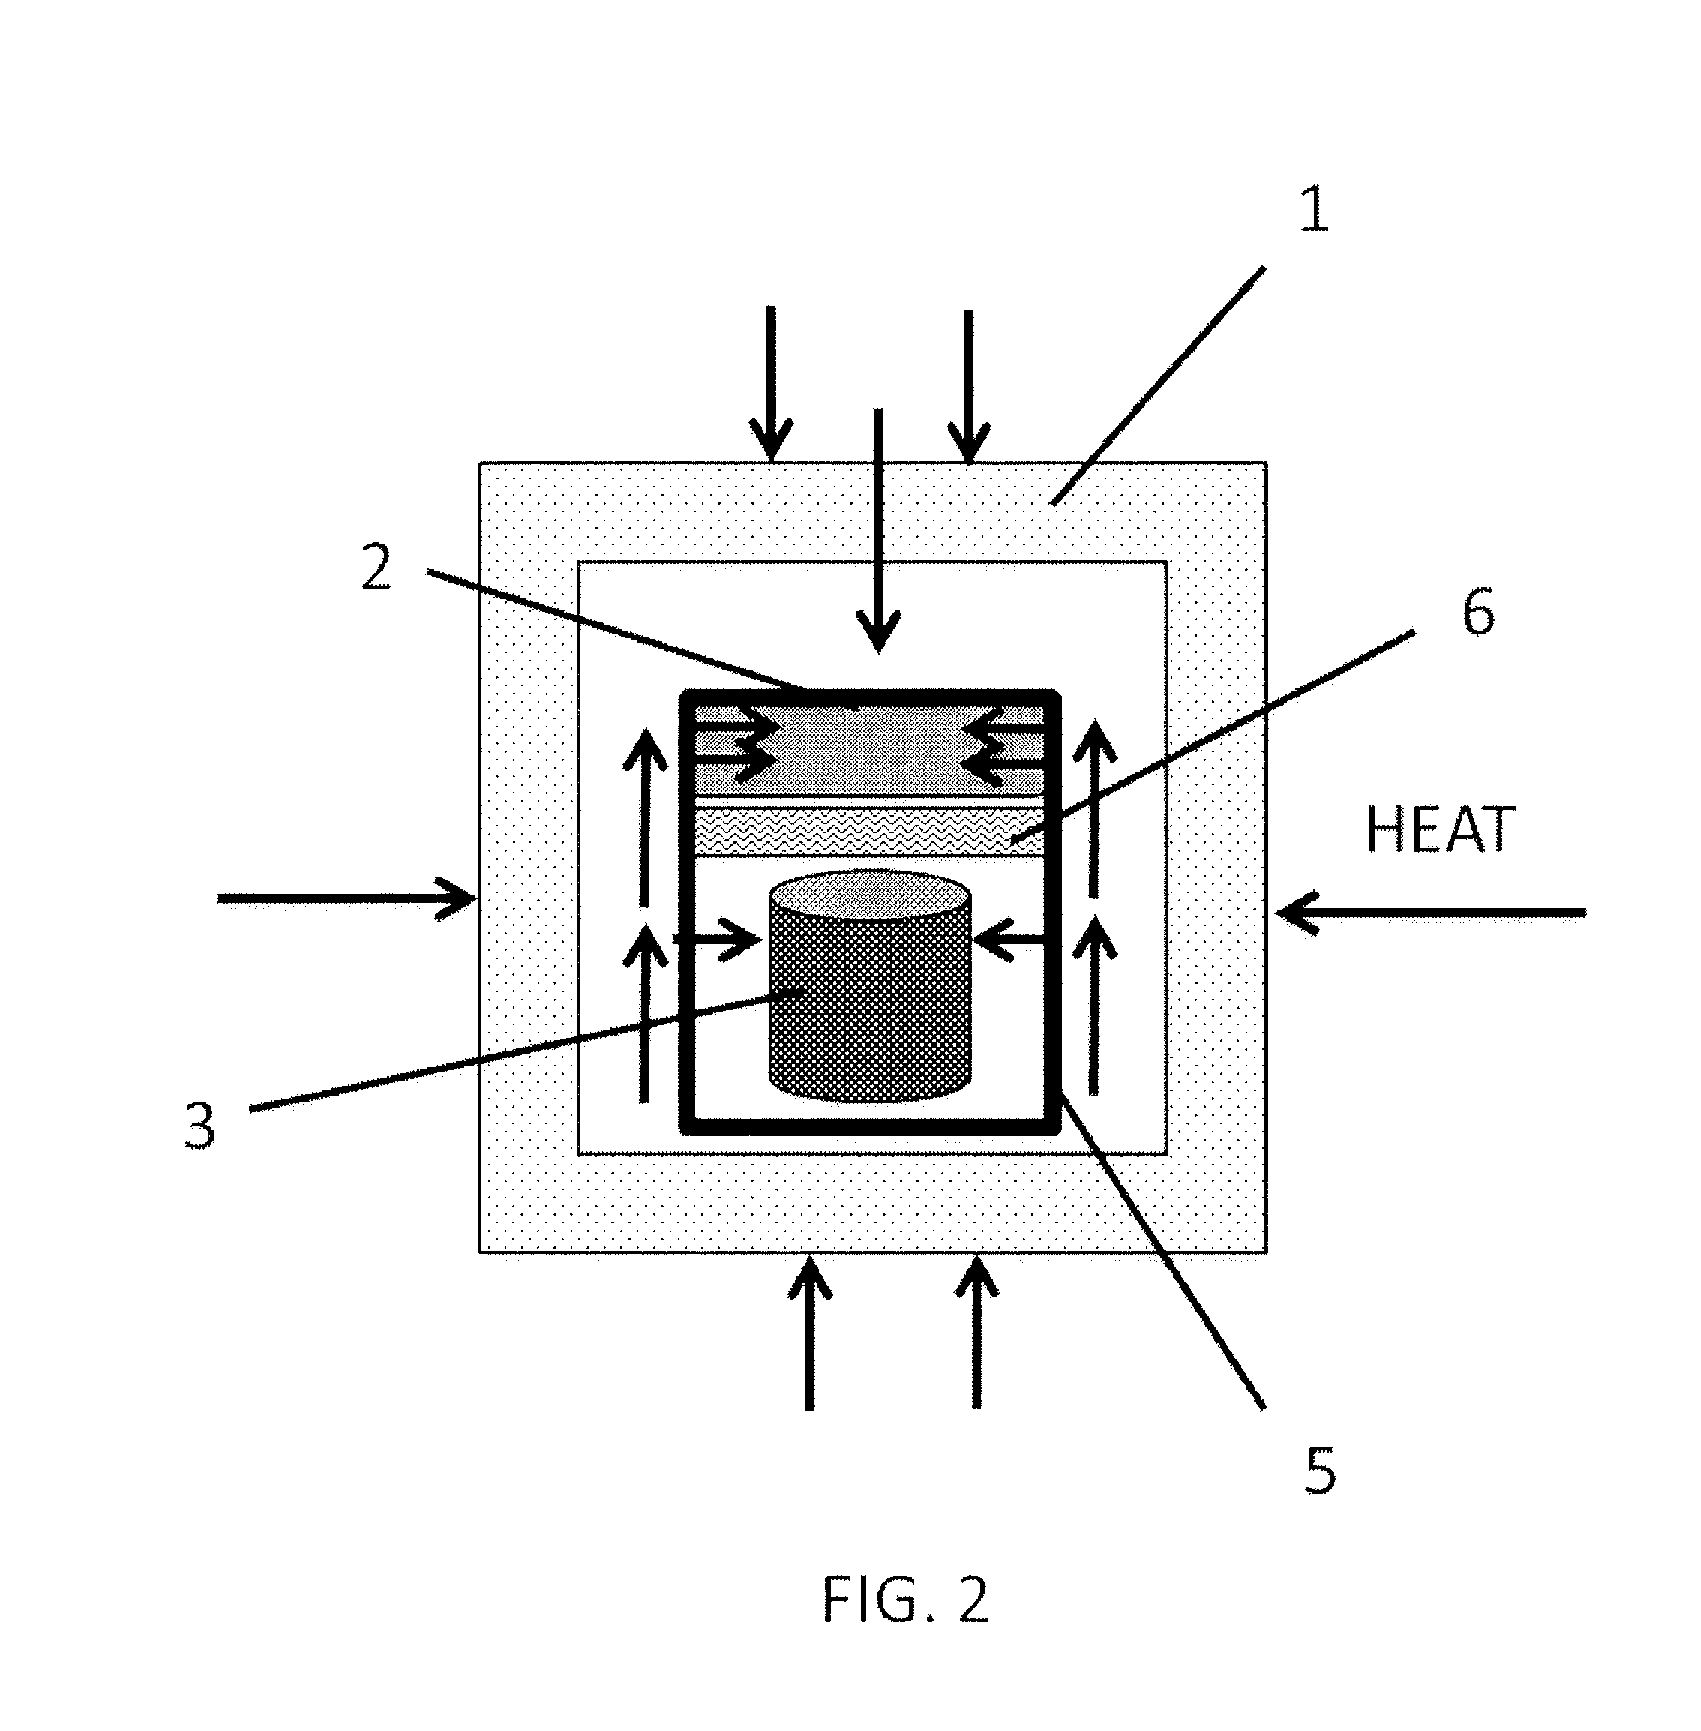 Method and Apparatus for Thermally Protecting and/or Transporting Temperature Sensitive Products